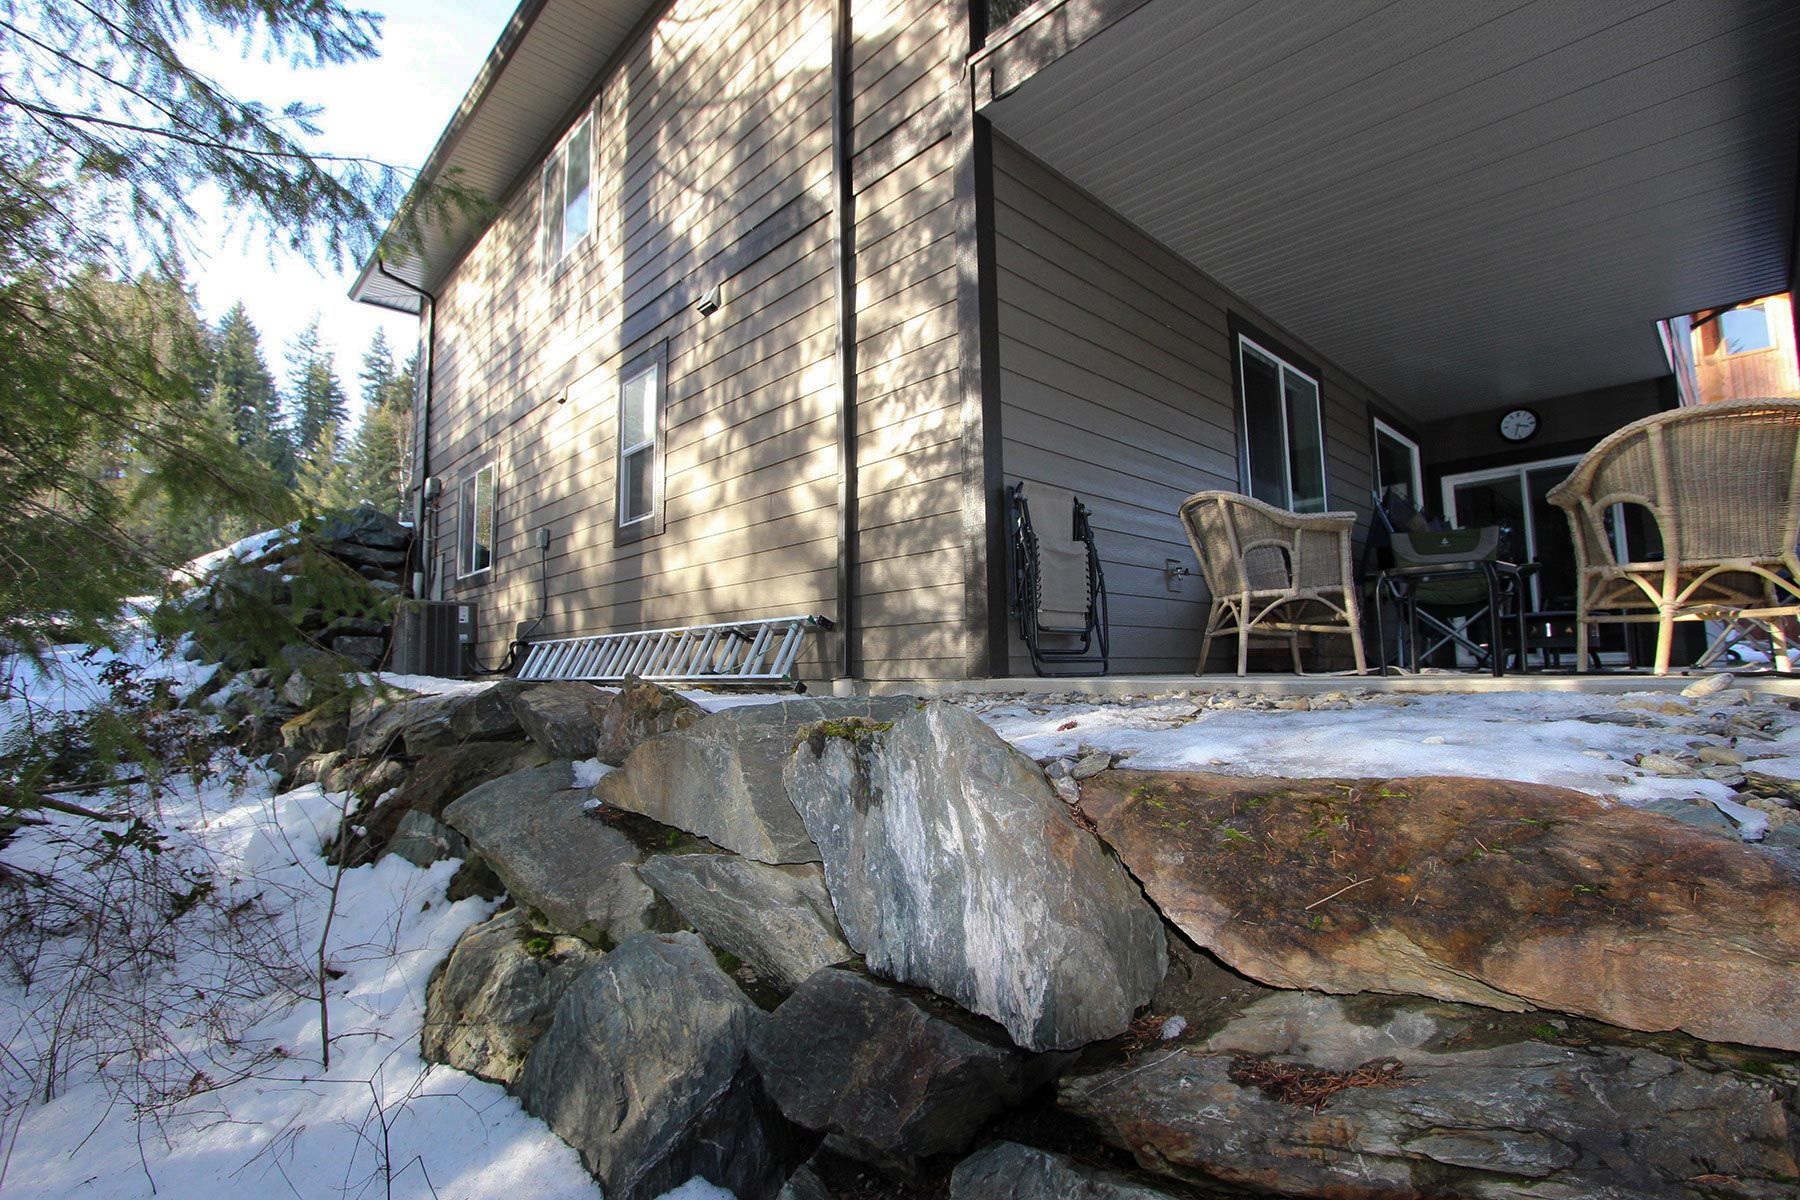 Photo 4: Photos: 2762 Valleyview Drive in Blind Bay: House for sale : MLS®# 10245854